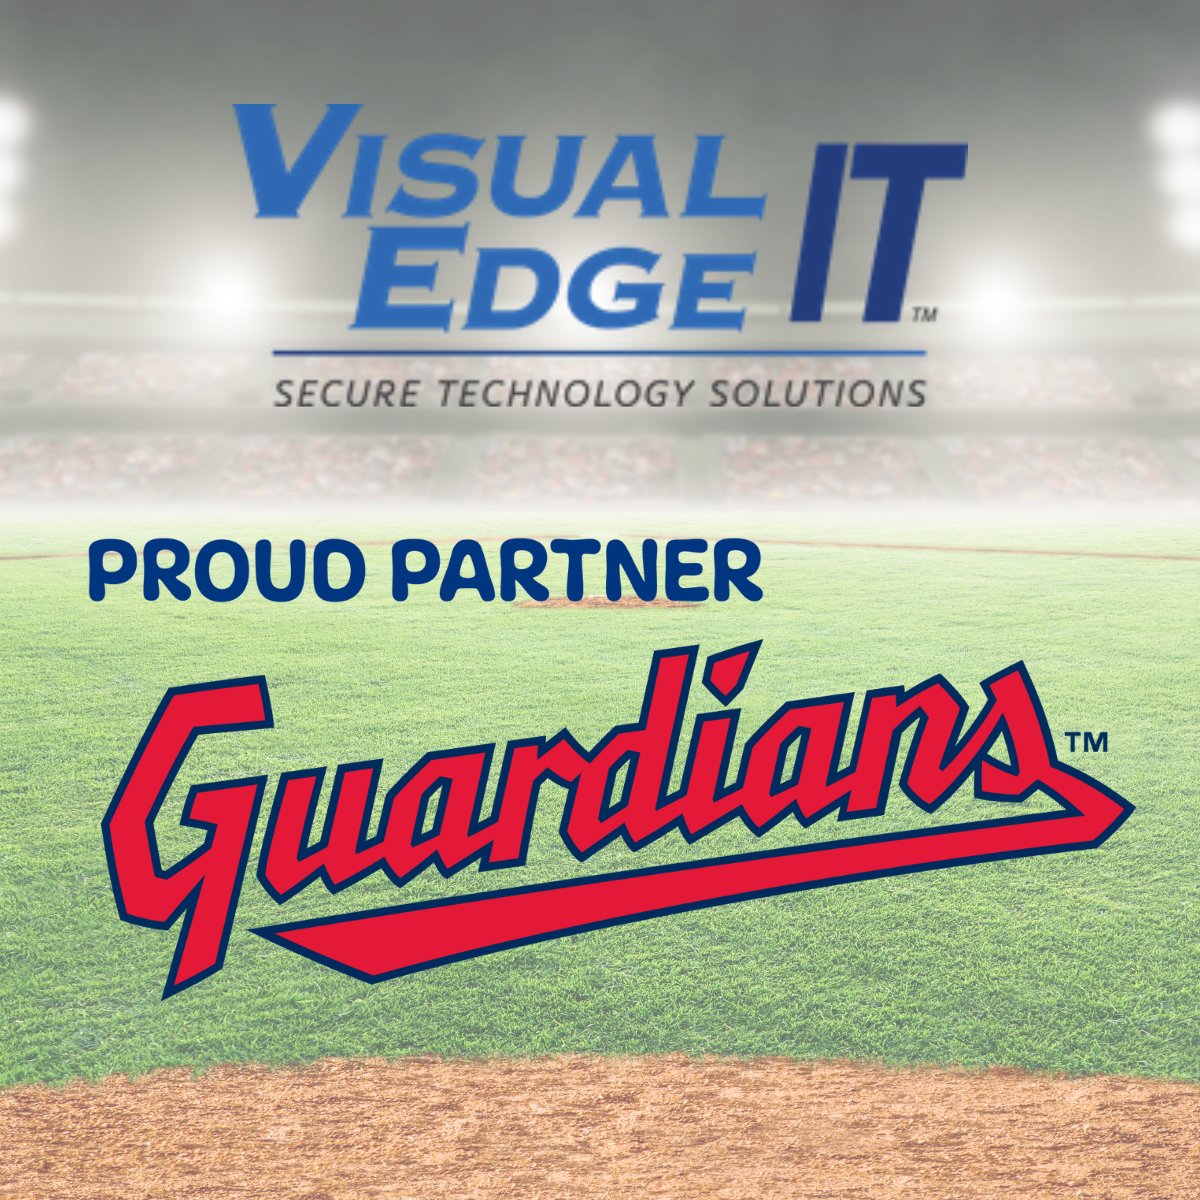 Visual Edge IT is excited and proud to be a partner of the Cleveland Guardians! ⚾
#clevelandguardians #VisualEdgeIT #cybersecurity